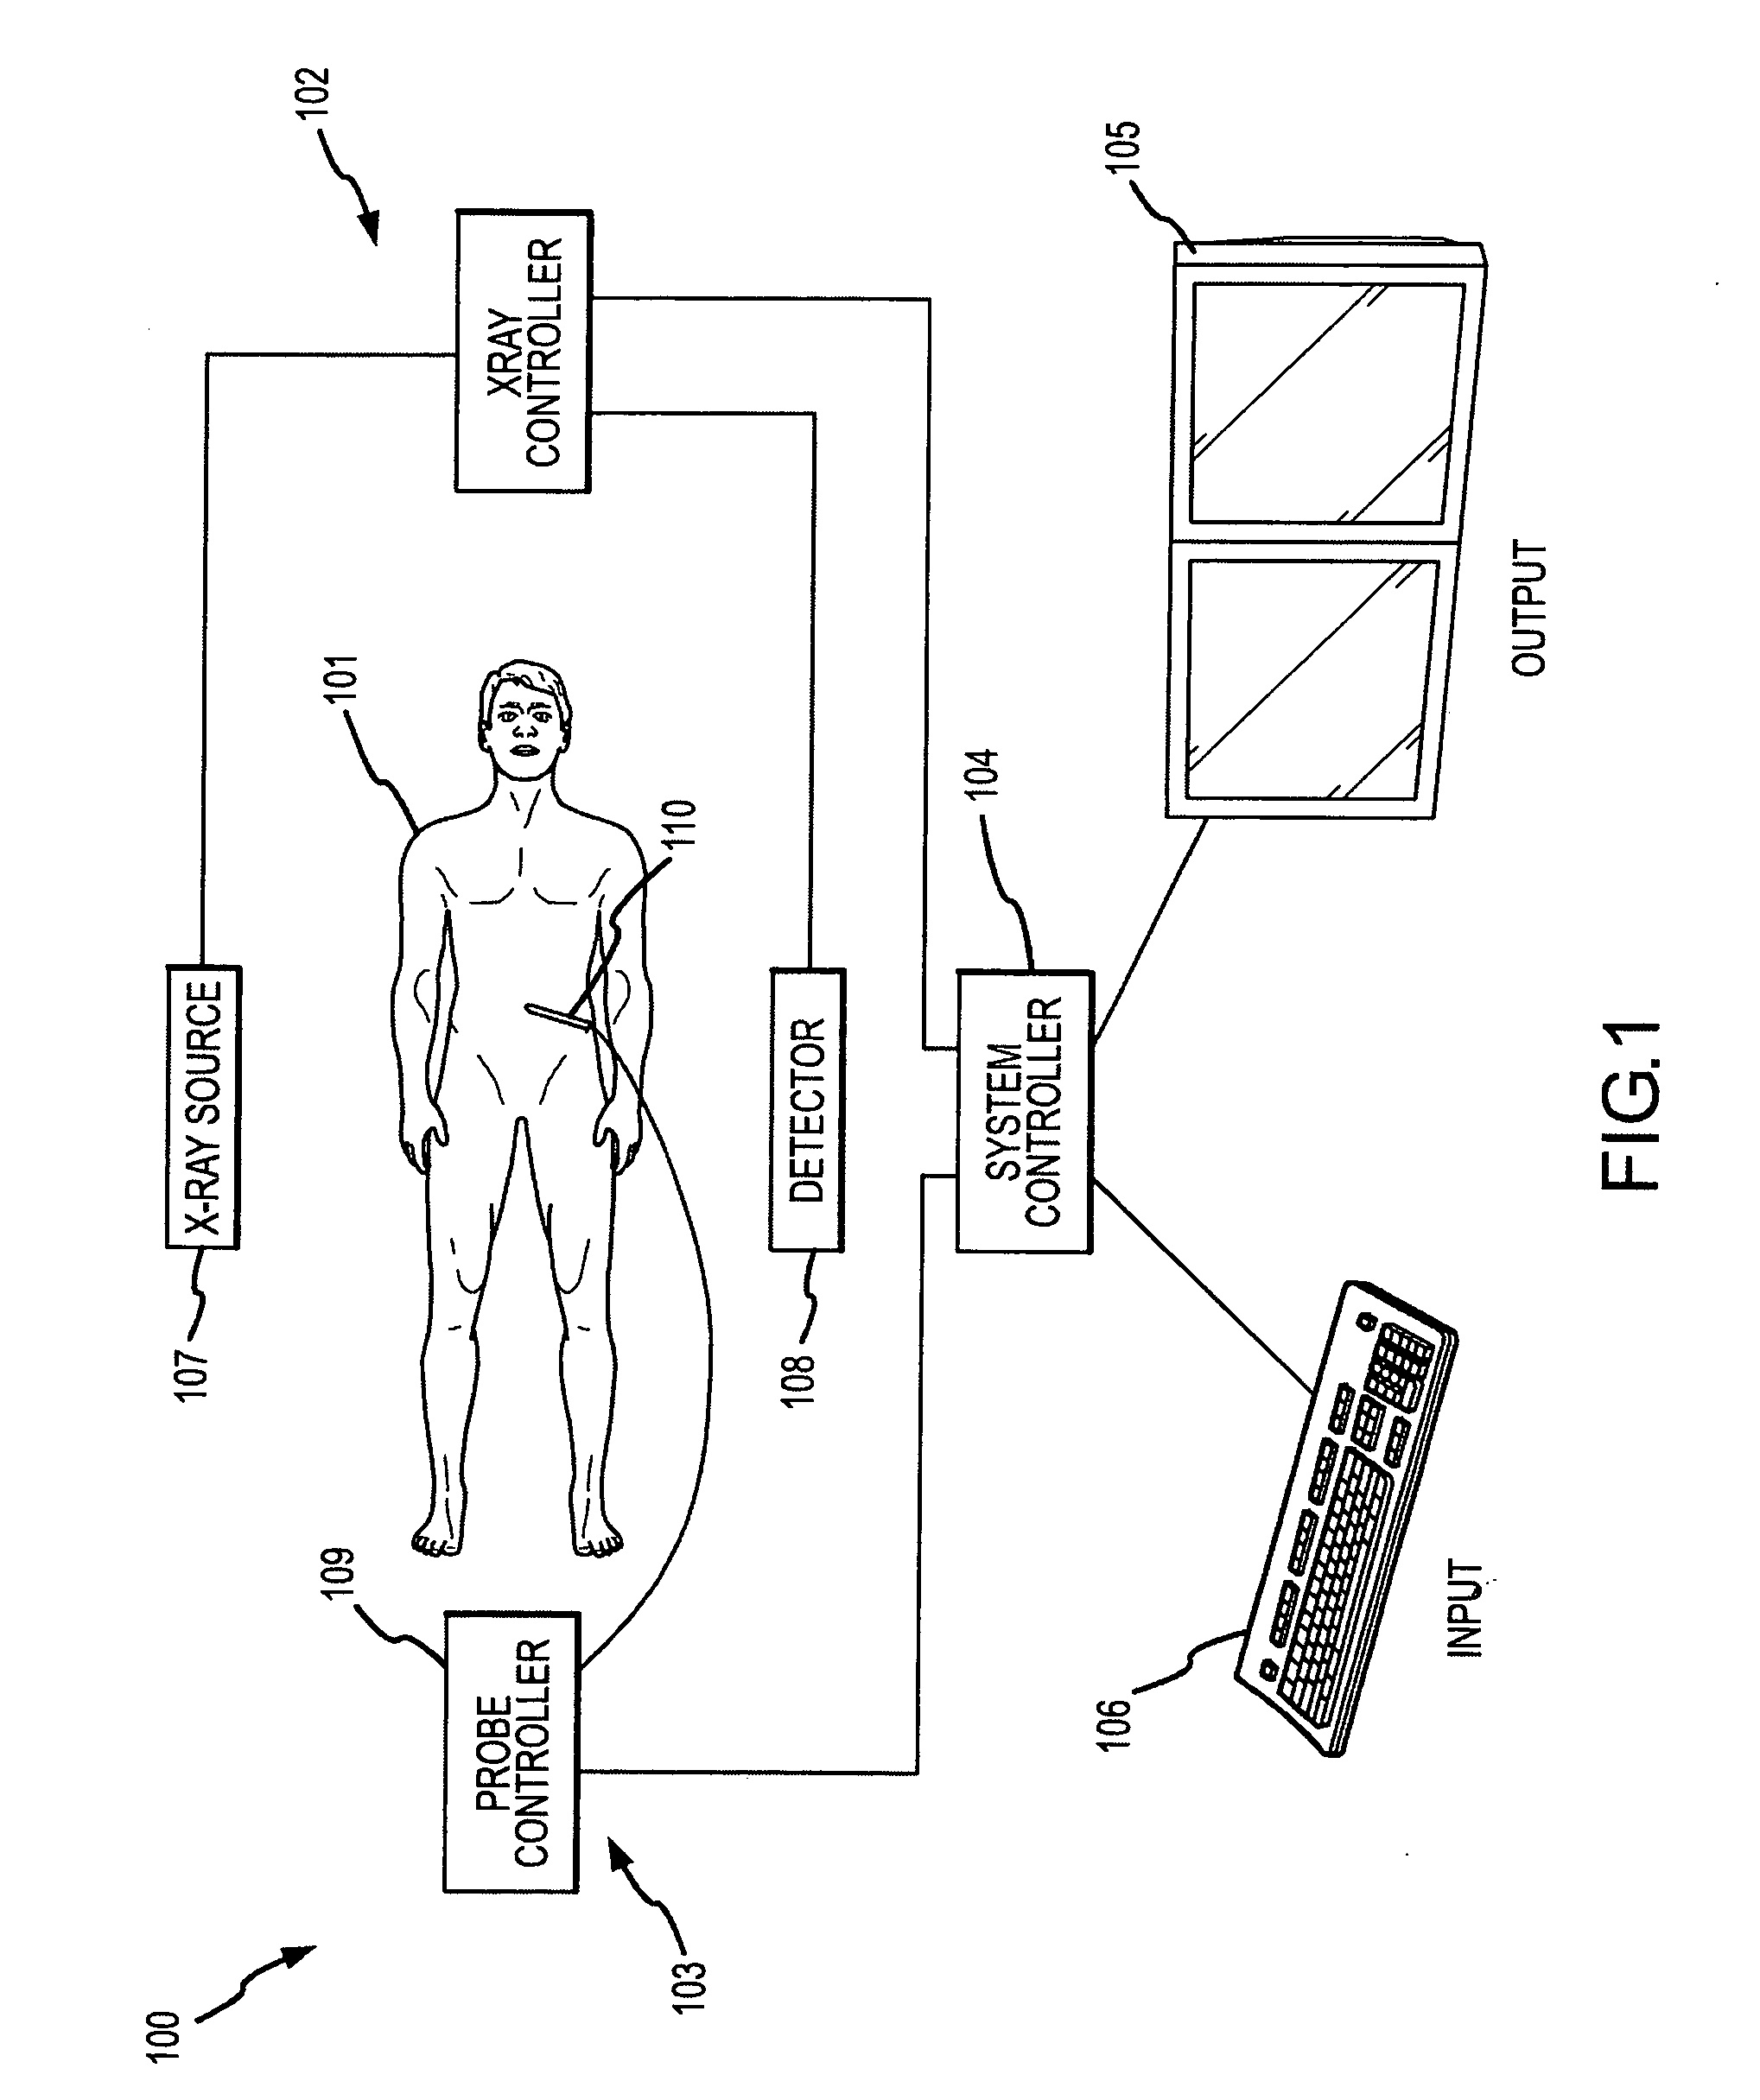 Method for planning, performing and monitoring thermal ablation